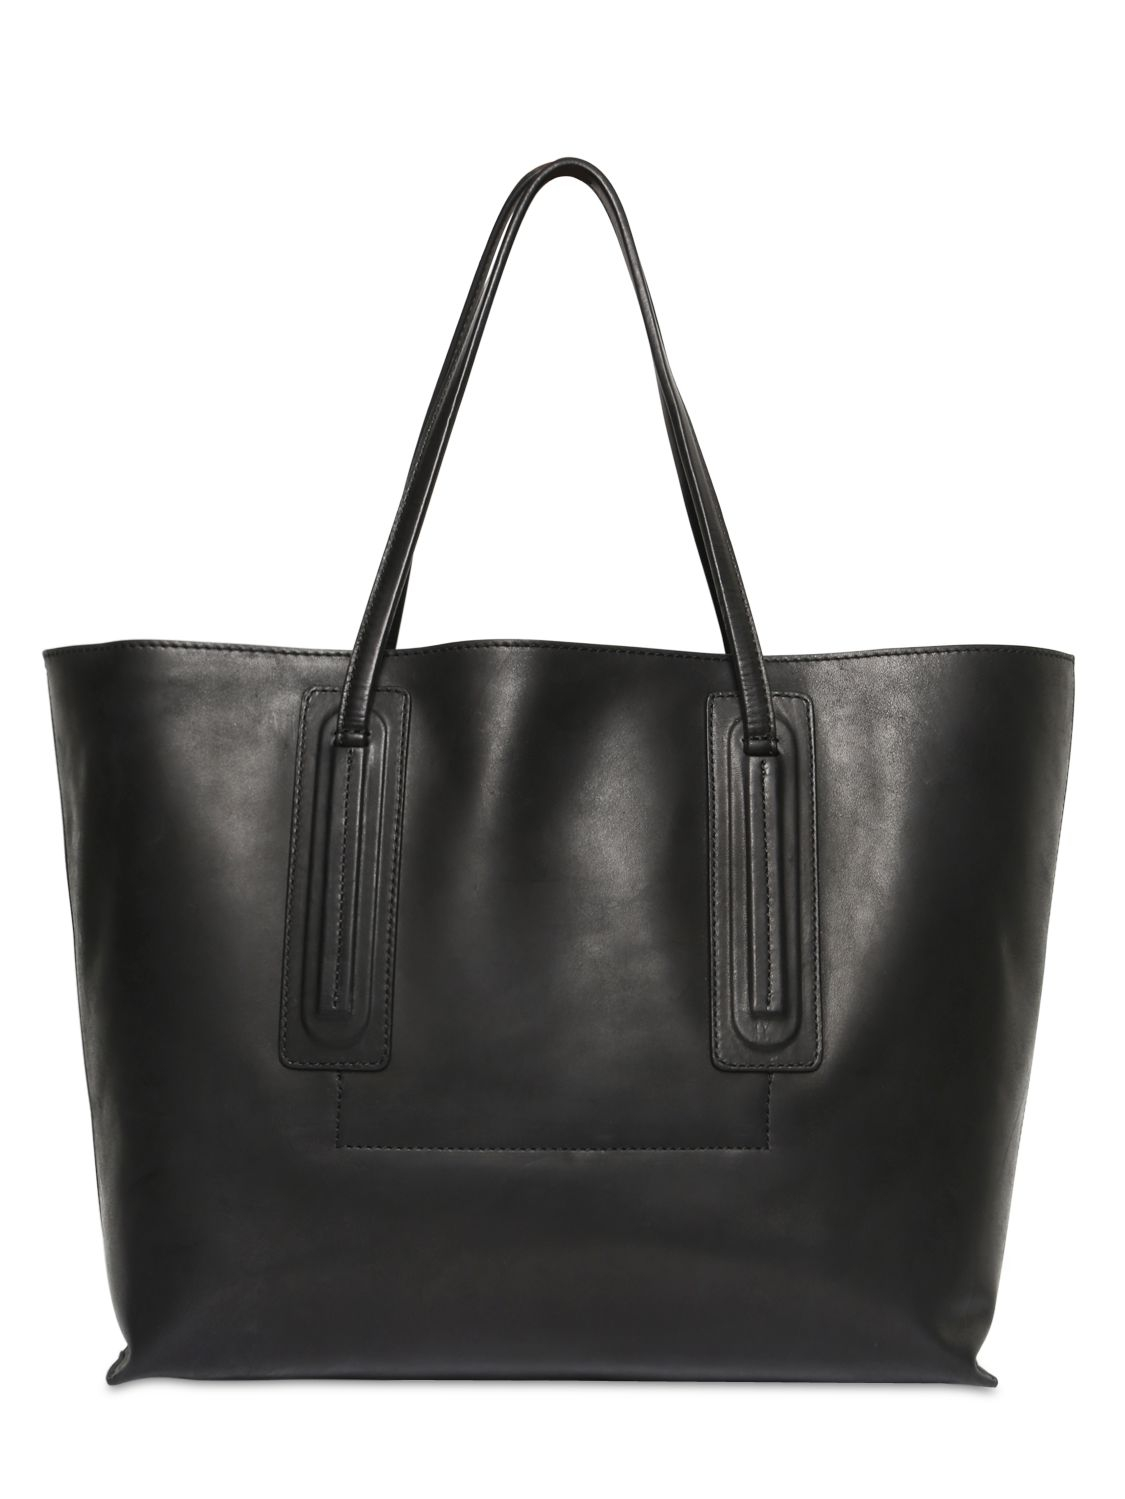 Rick Owens Large Horse Leather Tote Bag in Black - Lyst